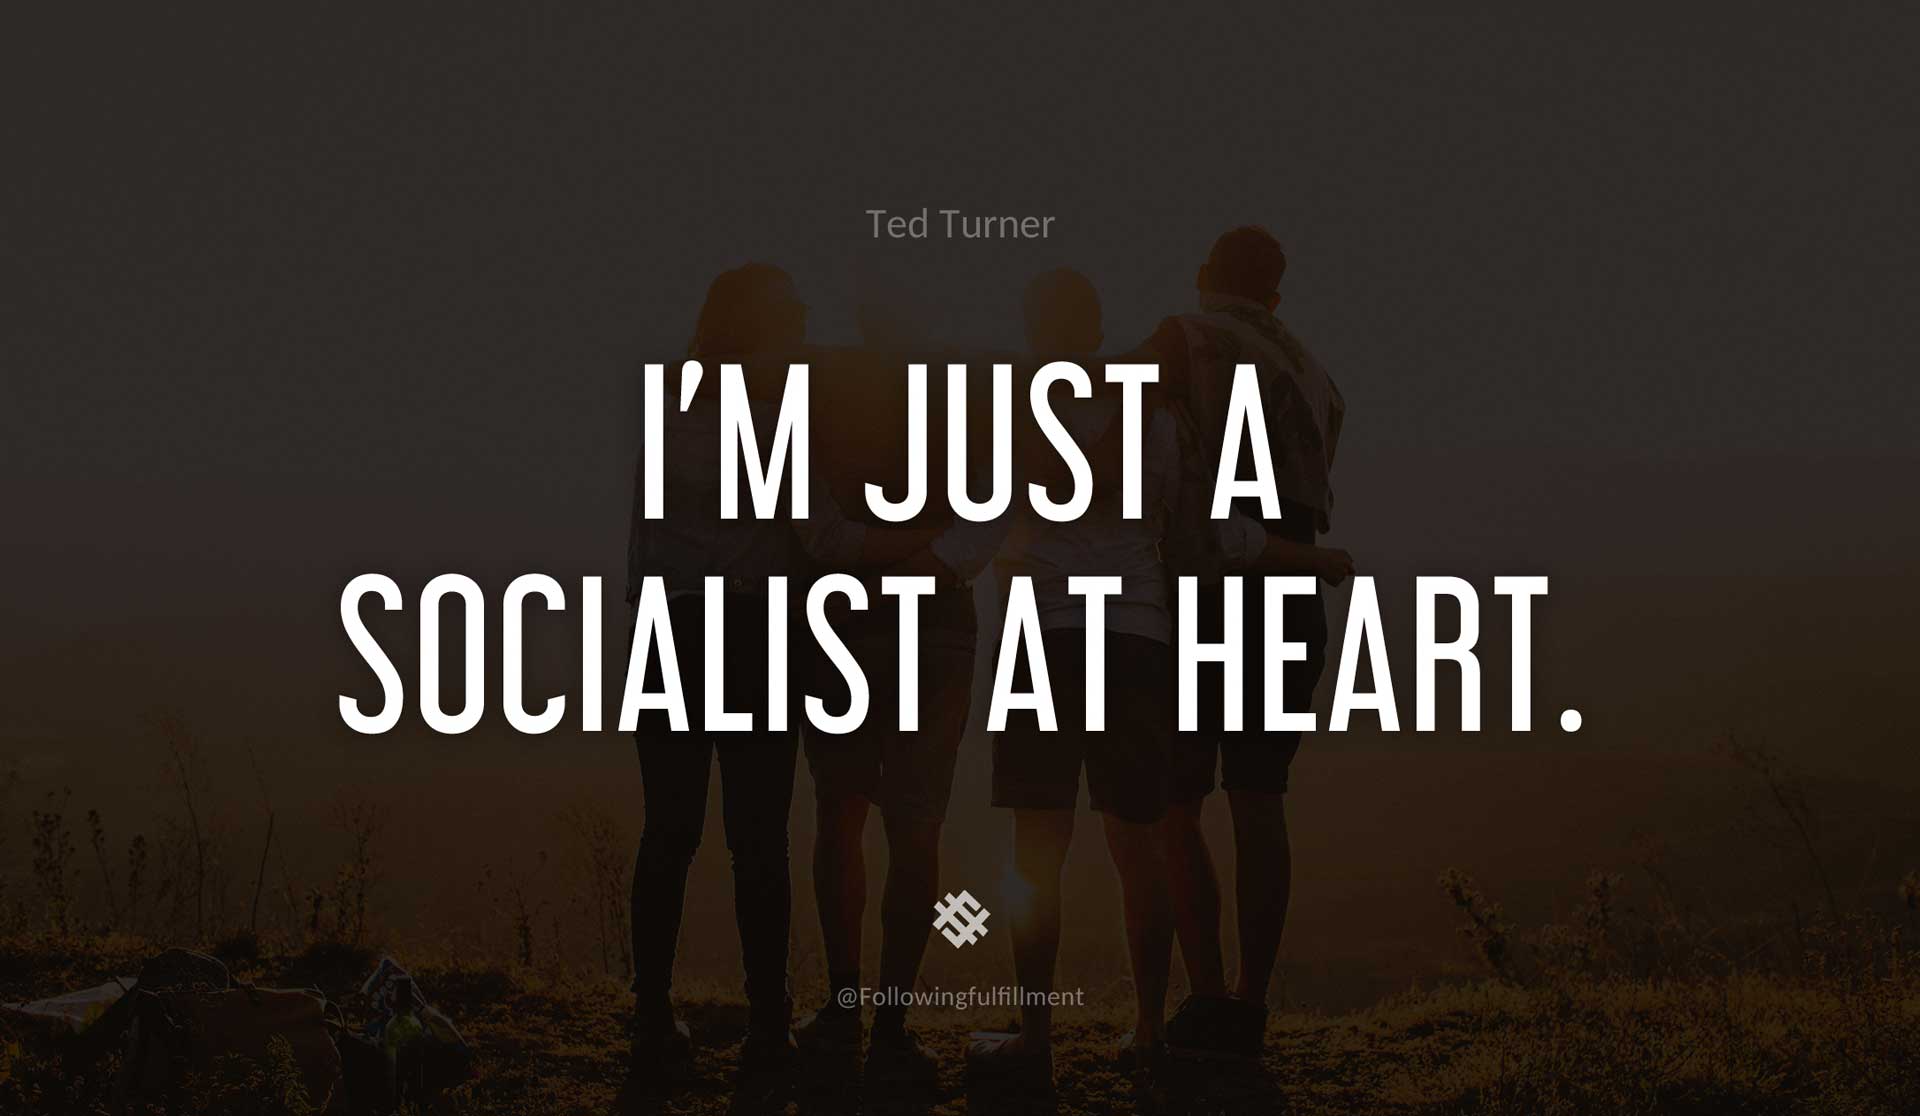 I'm-just-a-socialist-at-heart.-TED-TURNER-Quote.jpg